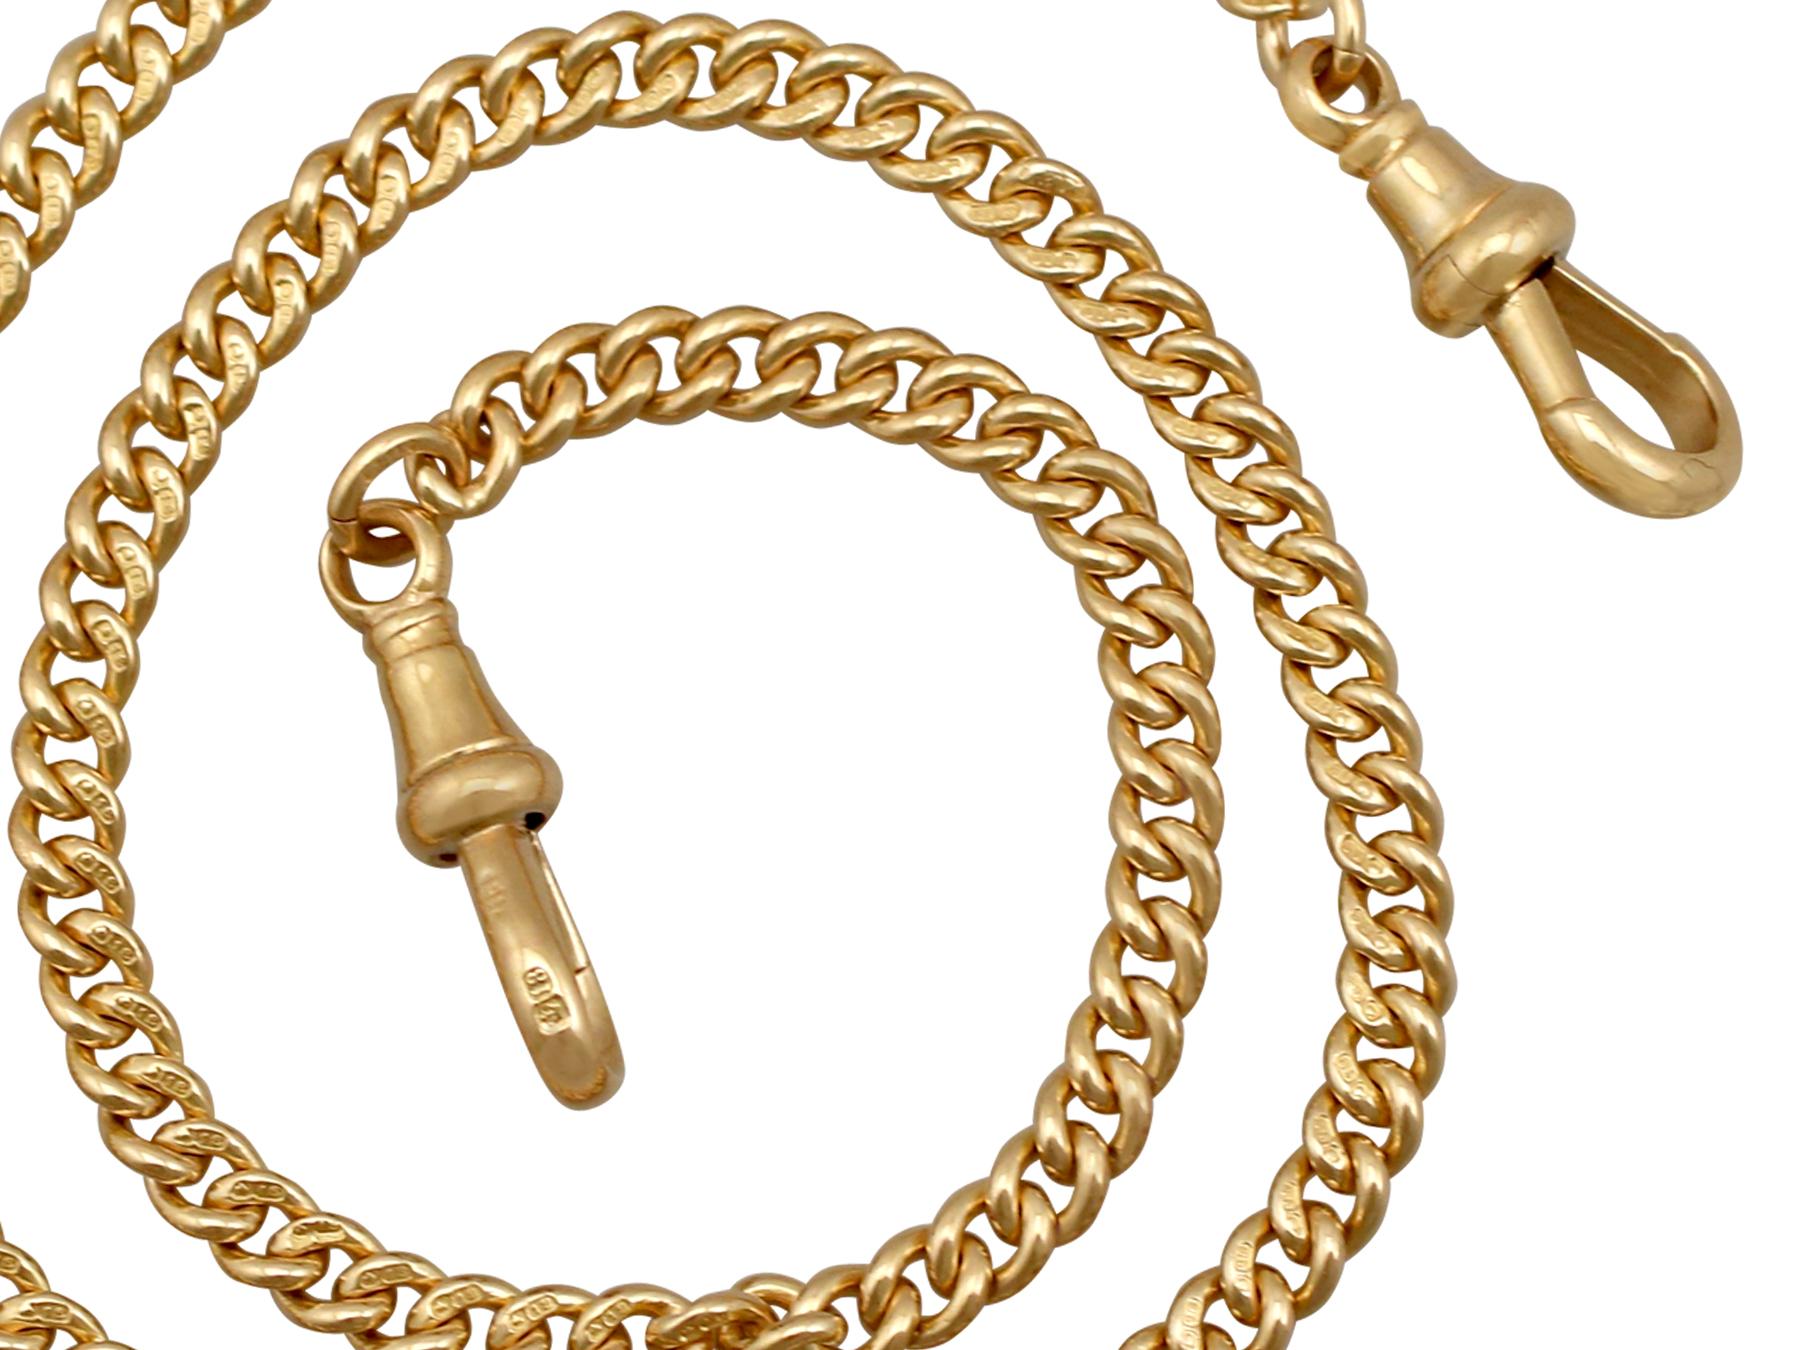 An impressive antique 1900's fob chain in 18 karat yellow gold; part of our diverse antique jewellery and estate jewelry collections.

This fine and impressive antique chain has been crafted in 18k yellow gold.

The fob chain necklace is composed of